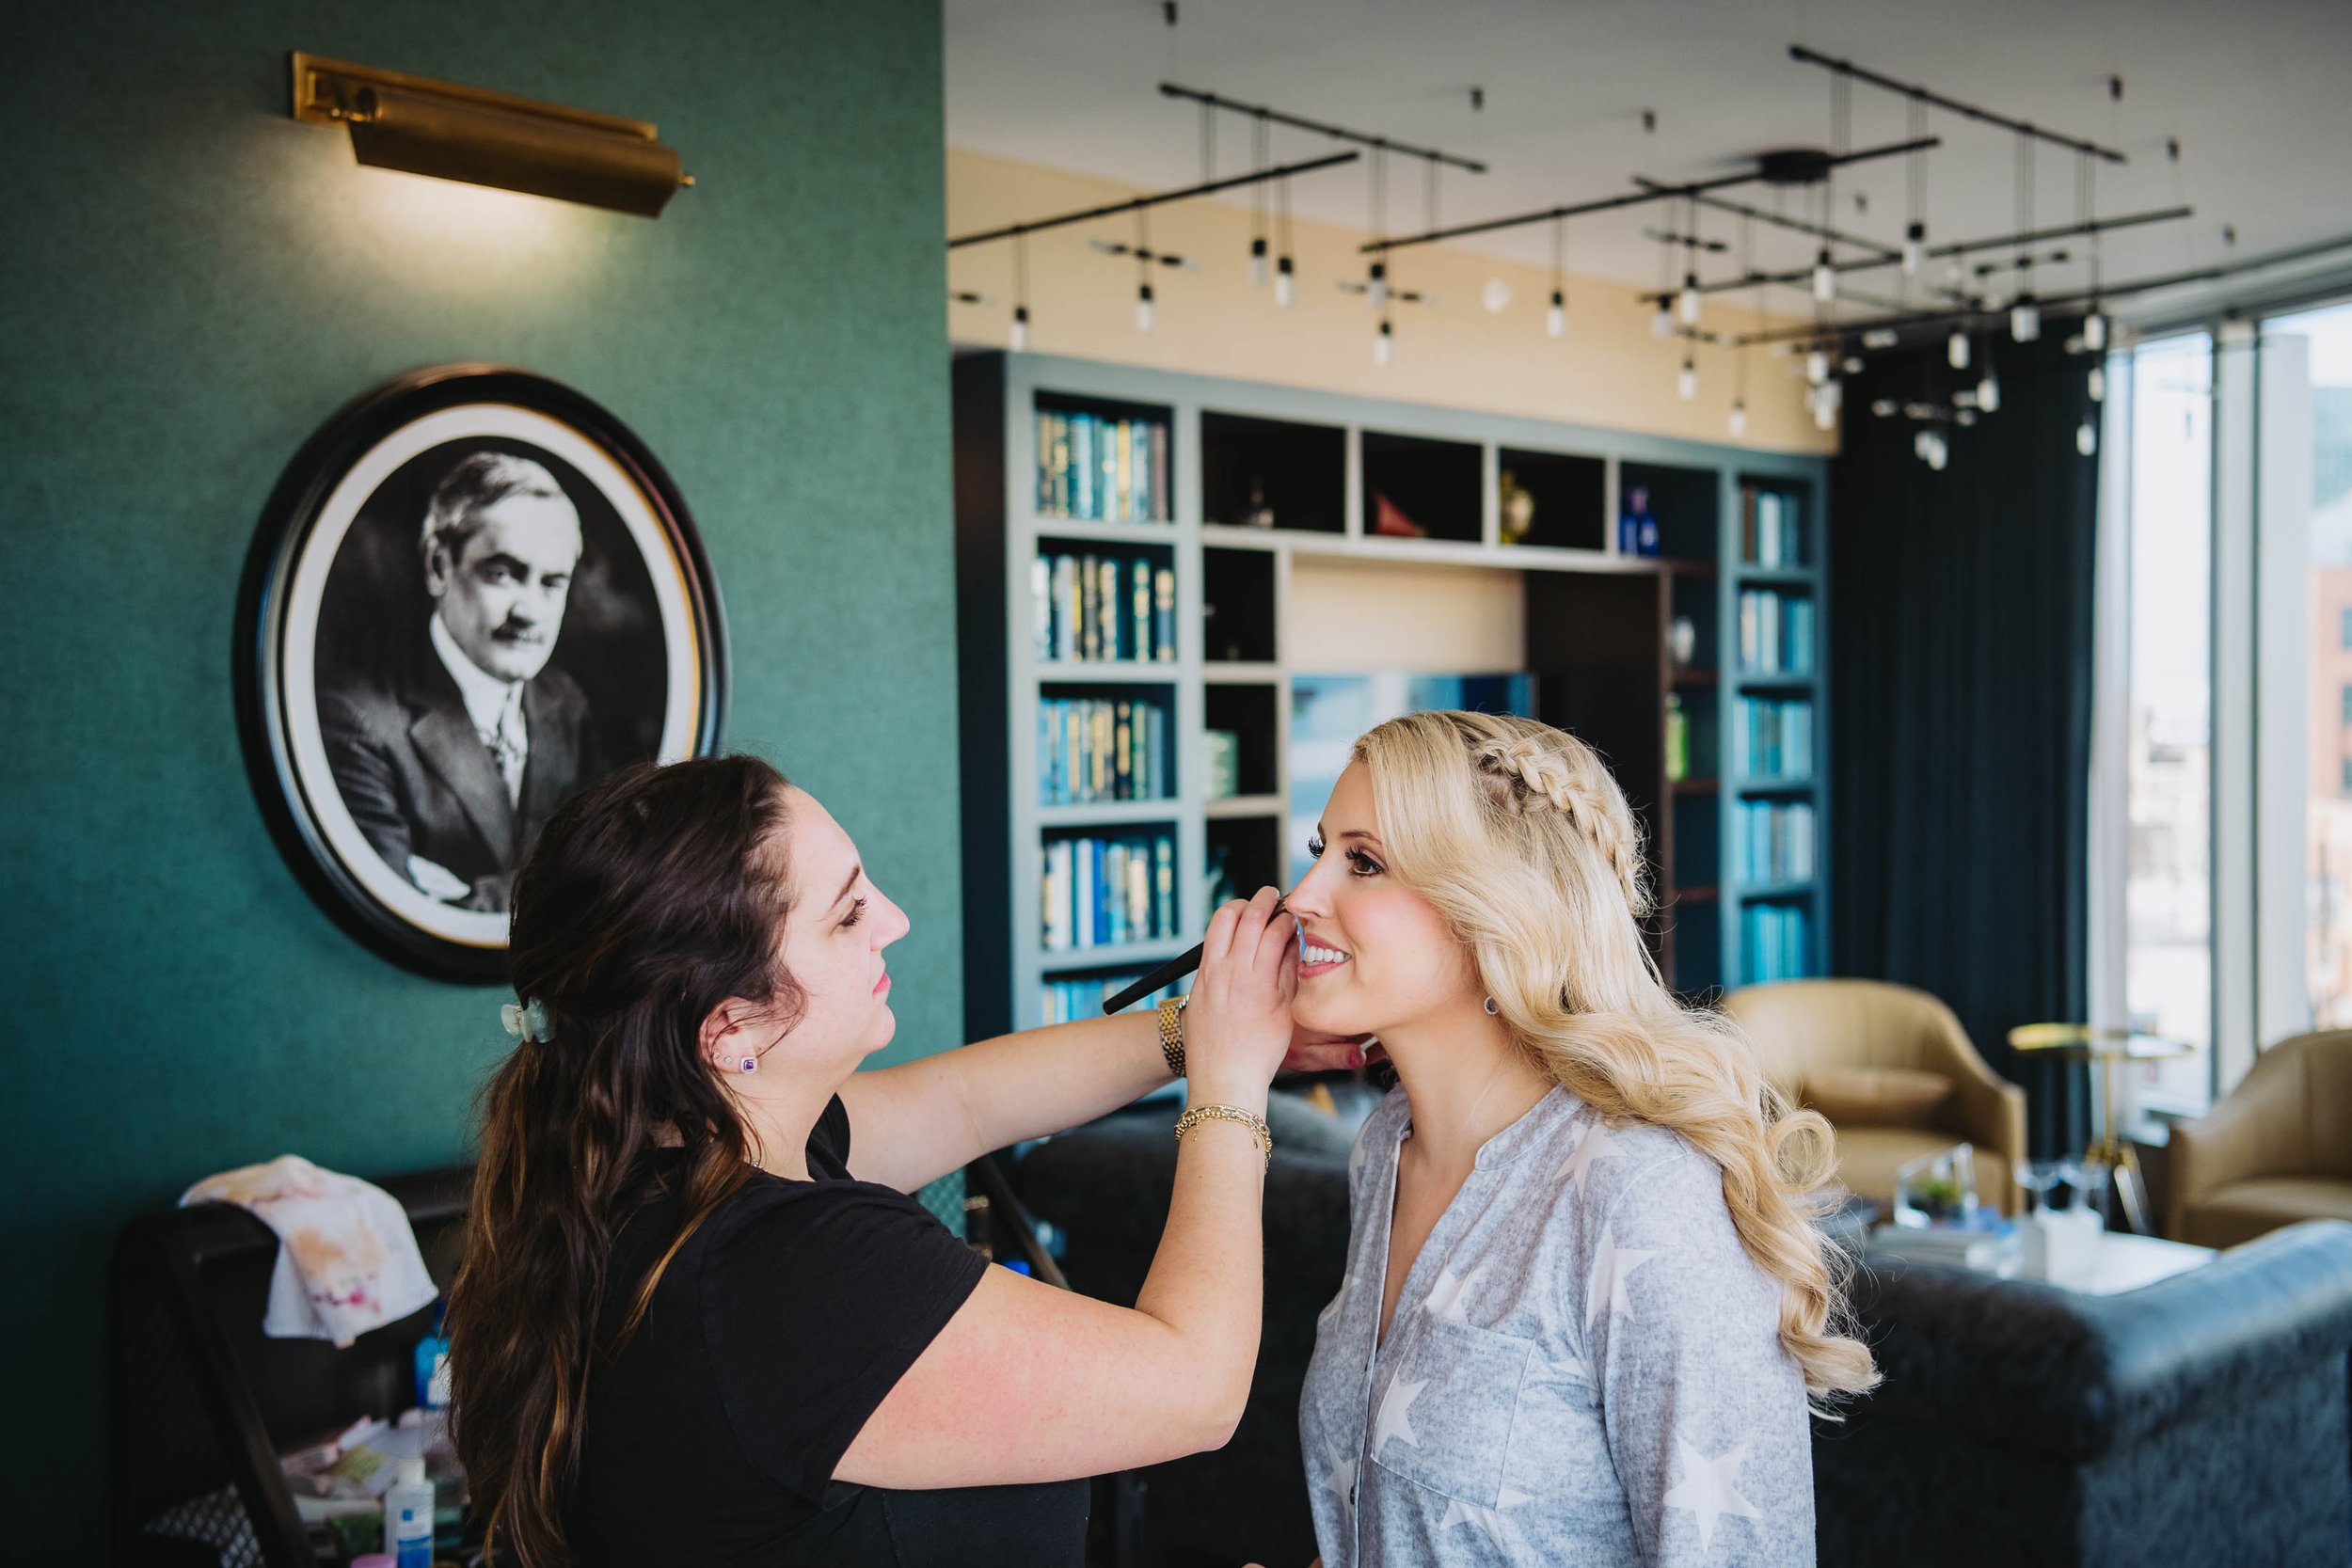 Wedding Day Photos | Ravenswood Event Center | J. Brown Photography | bride getting ready on her wedding day